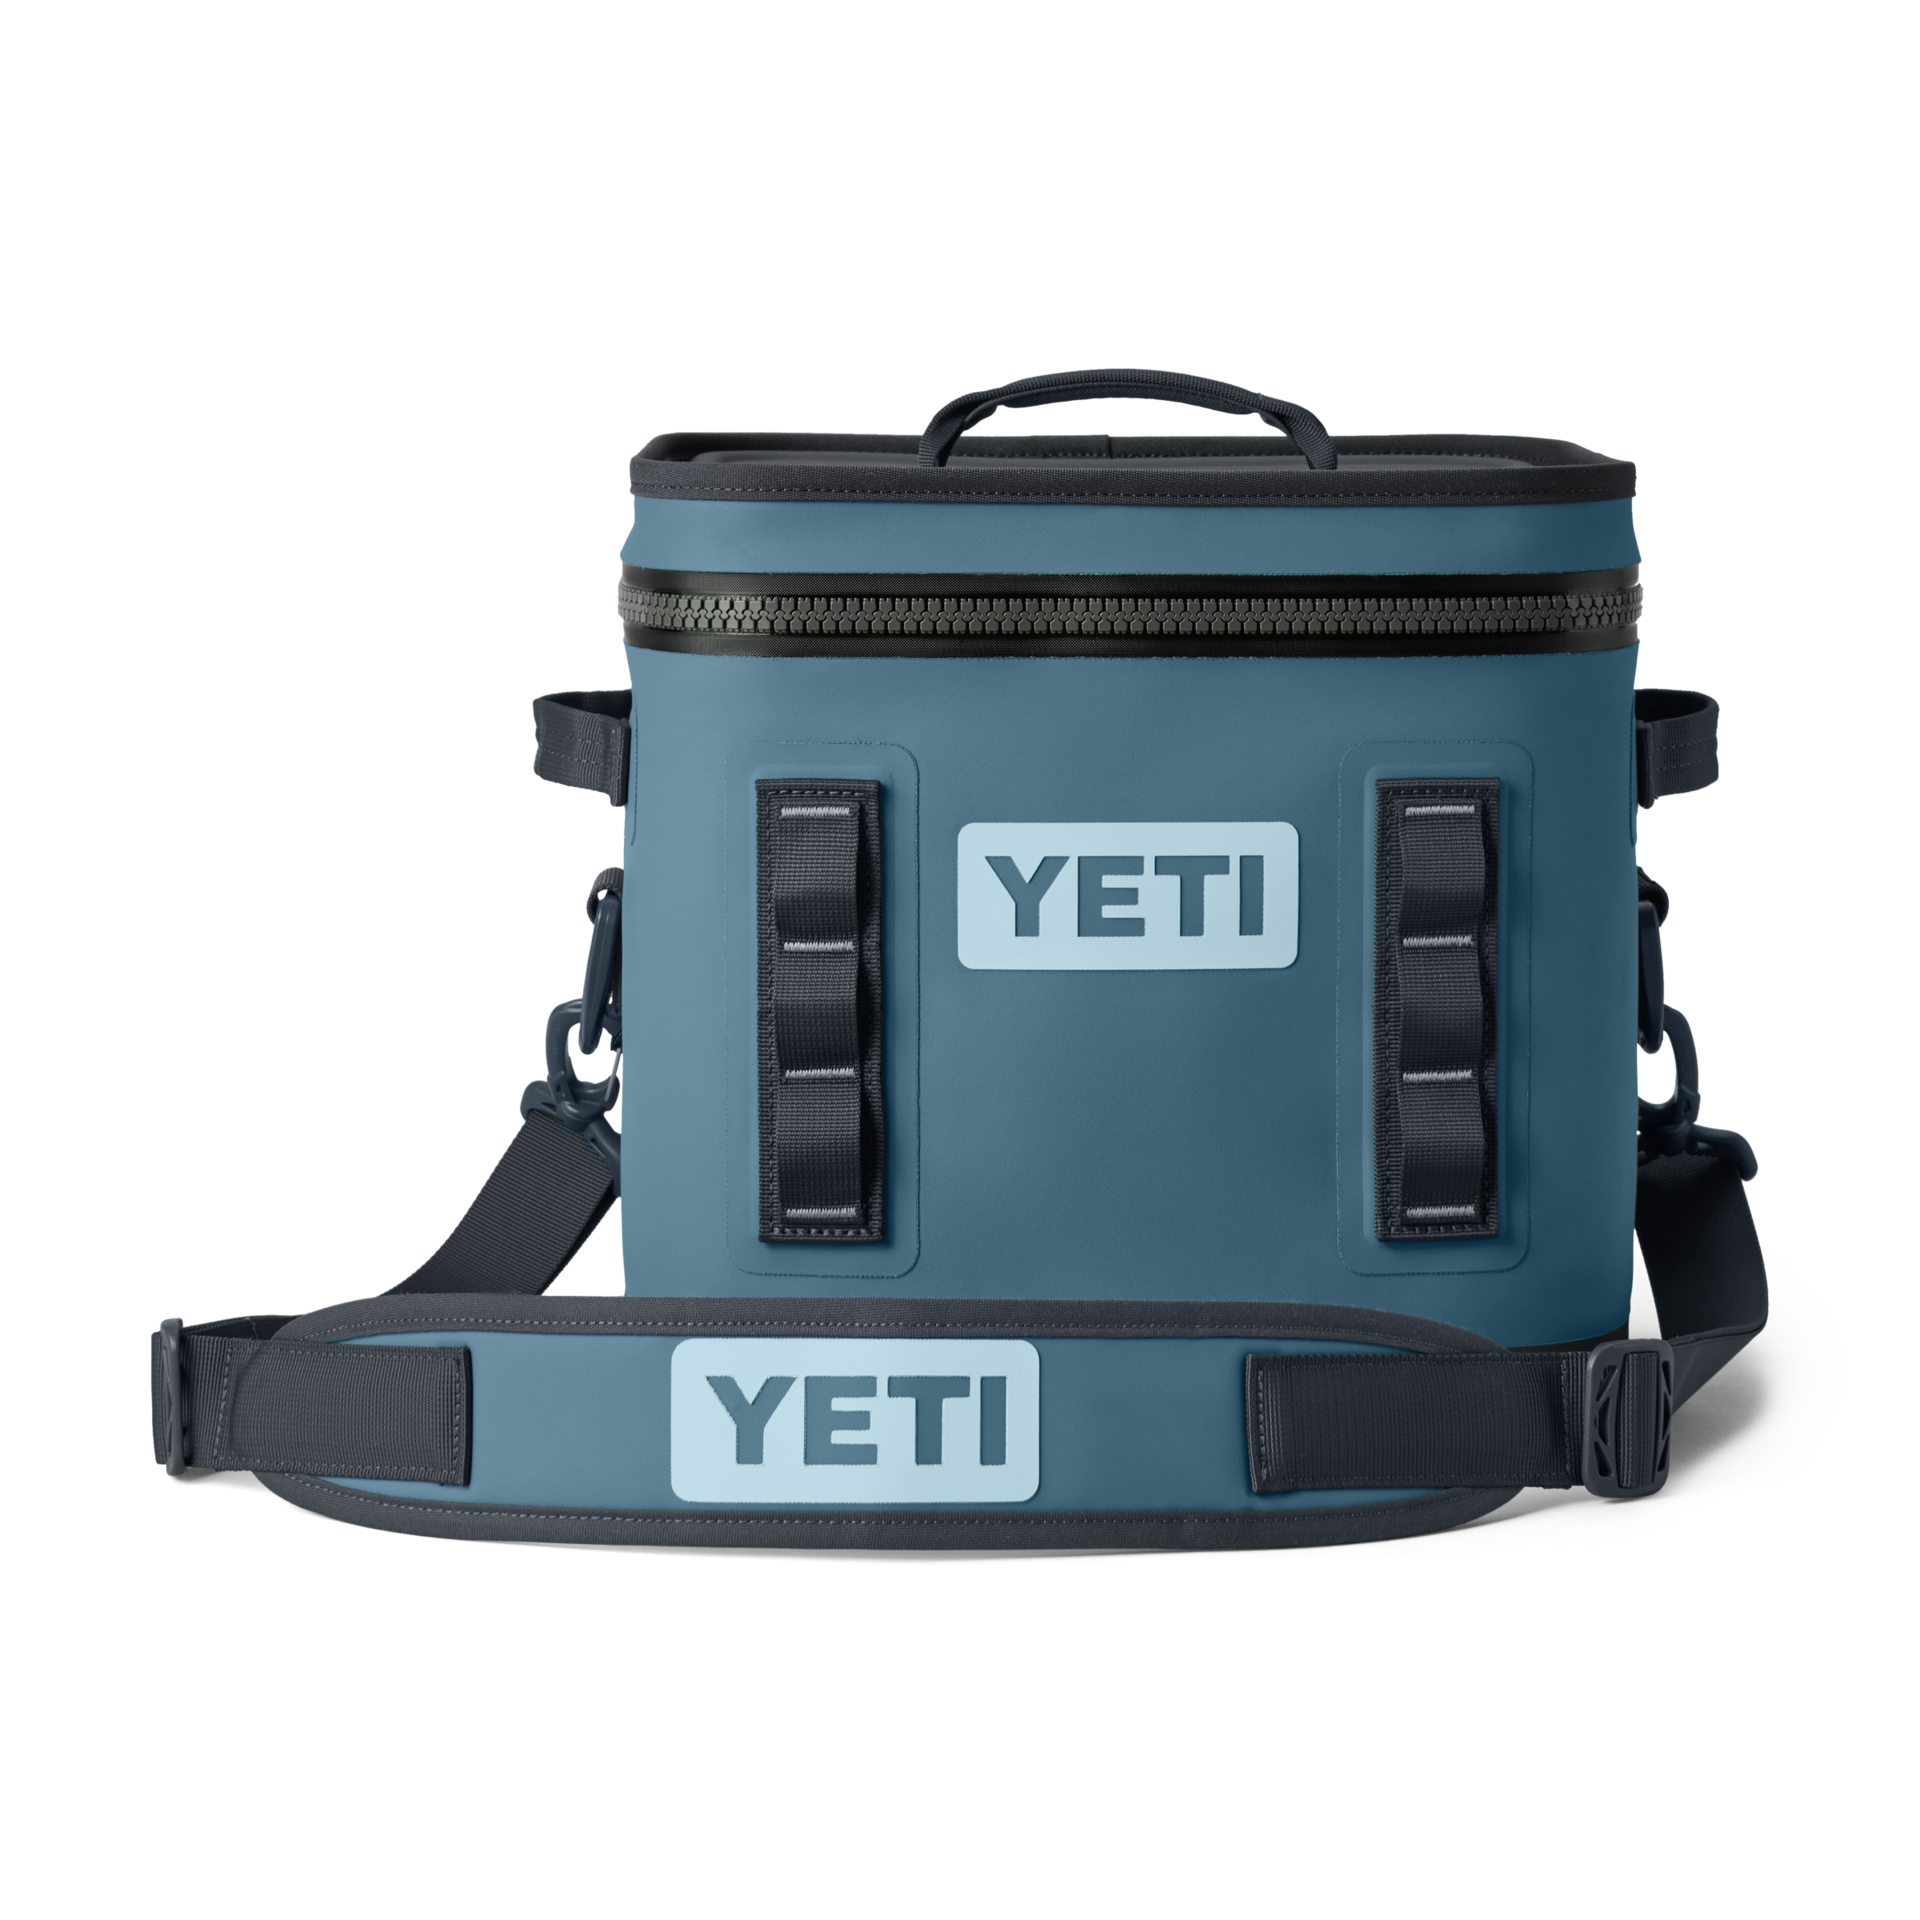 New With Box Yeti Hopper Flip 12 Portable Cooler, Charcoal